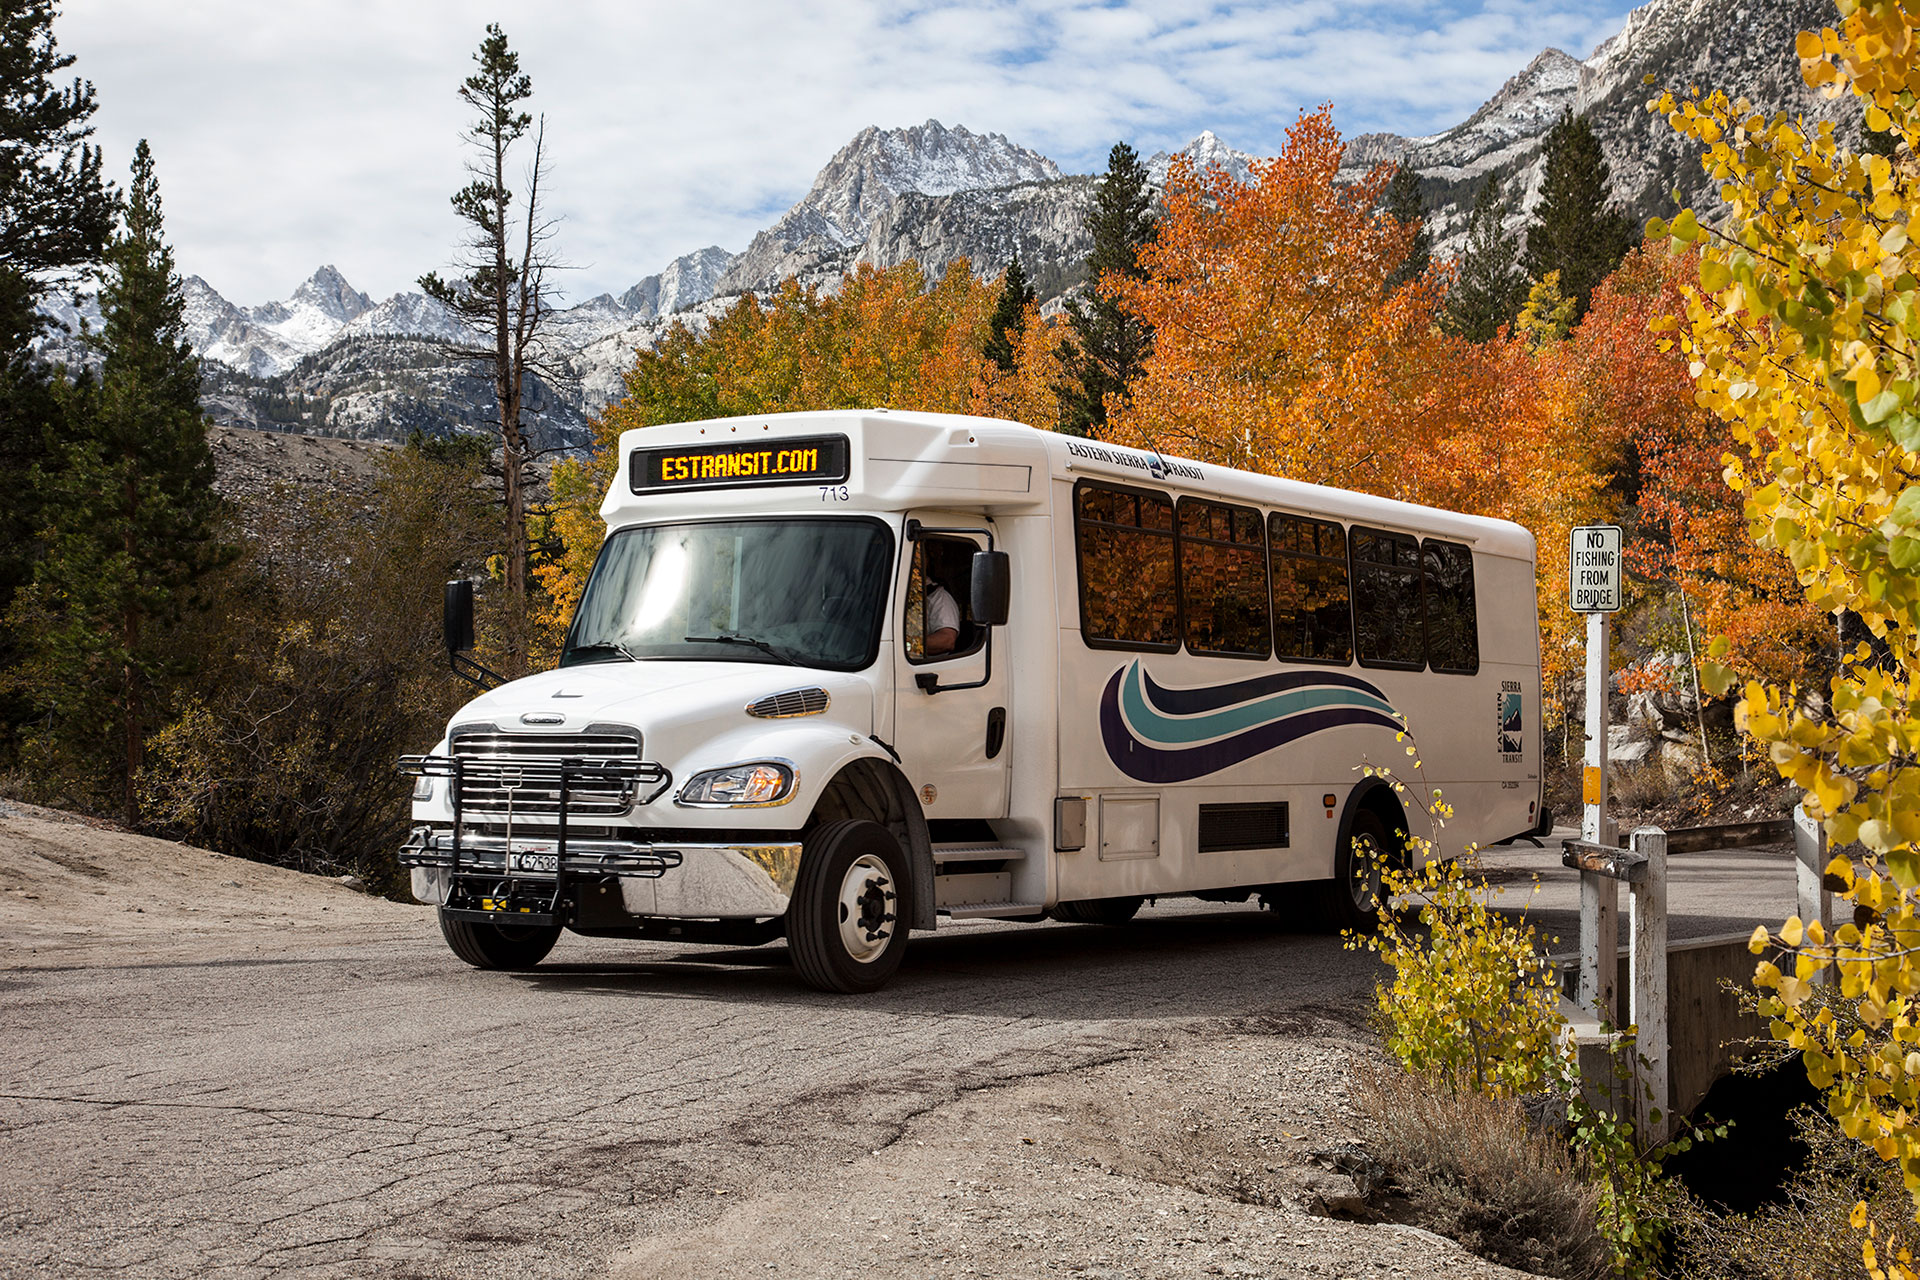 Eastern Sierra Transit is one of the outstanding rural transit companies that services the Pacific Crest Trail. We appreciate them so much. Photo courtesy of Eastern Sierra Transit.